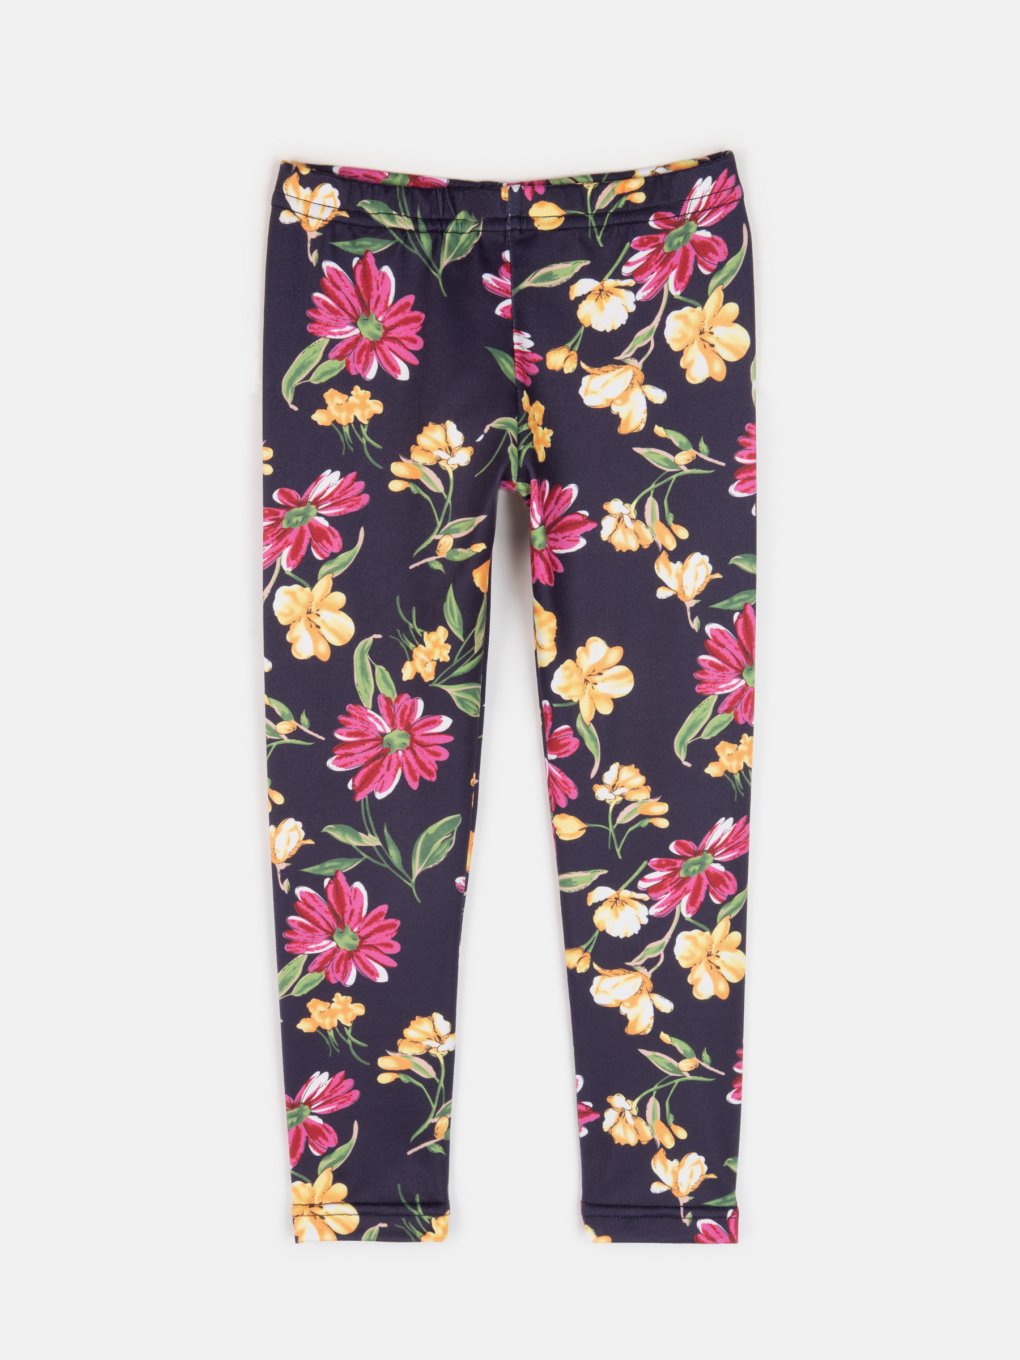 Sport leggings with floral print